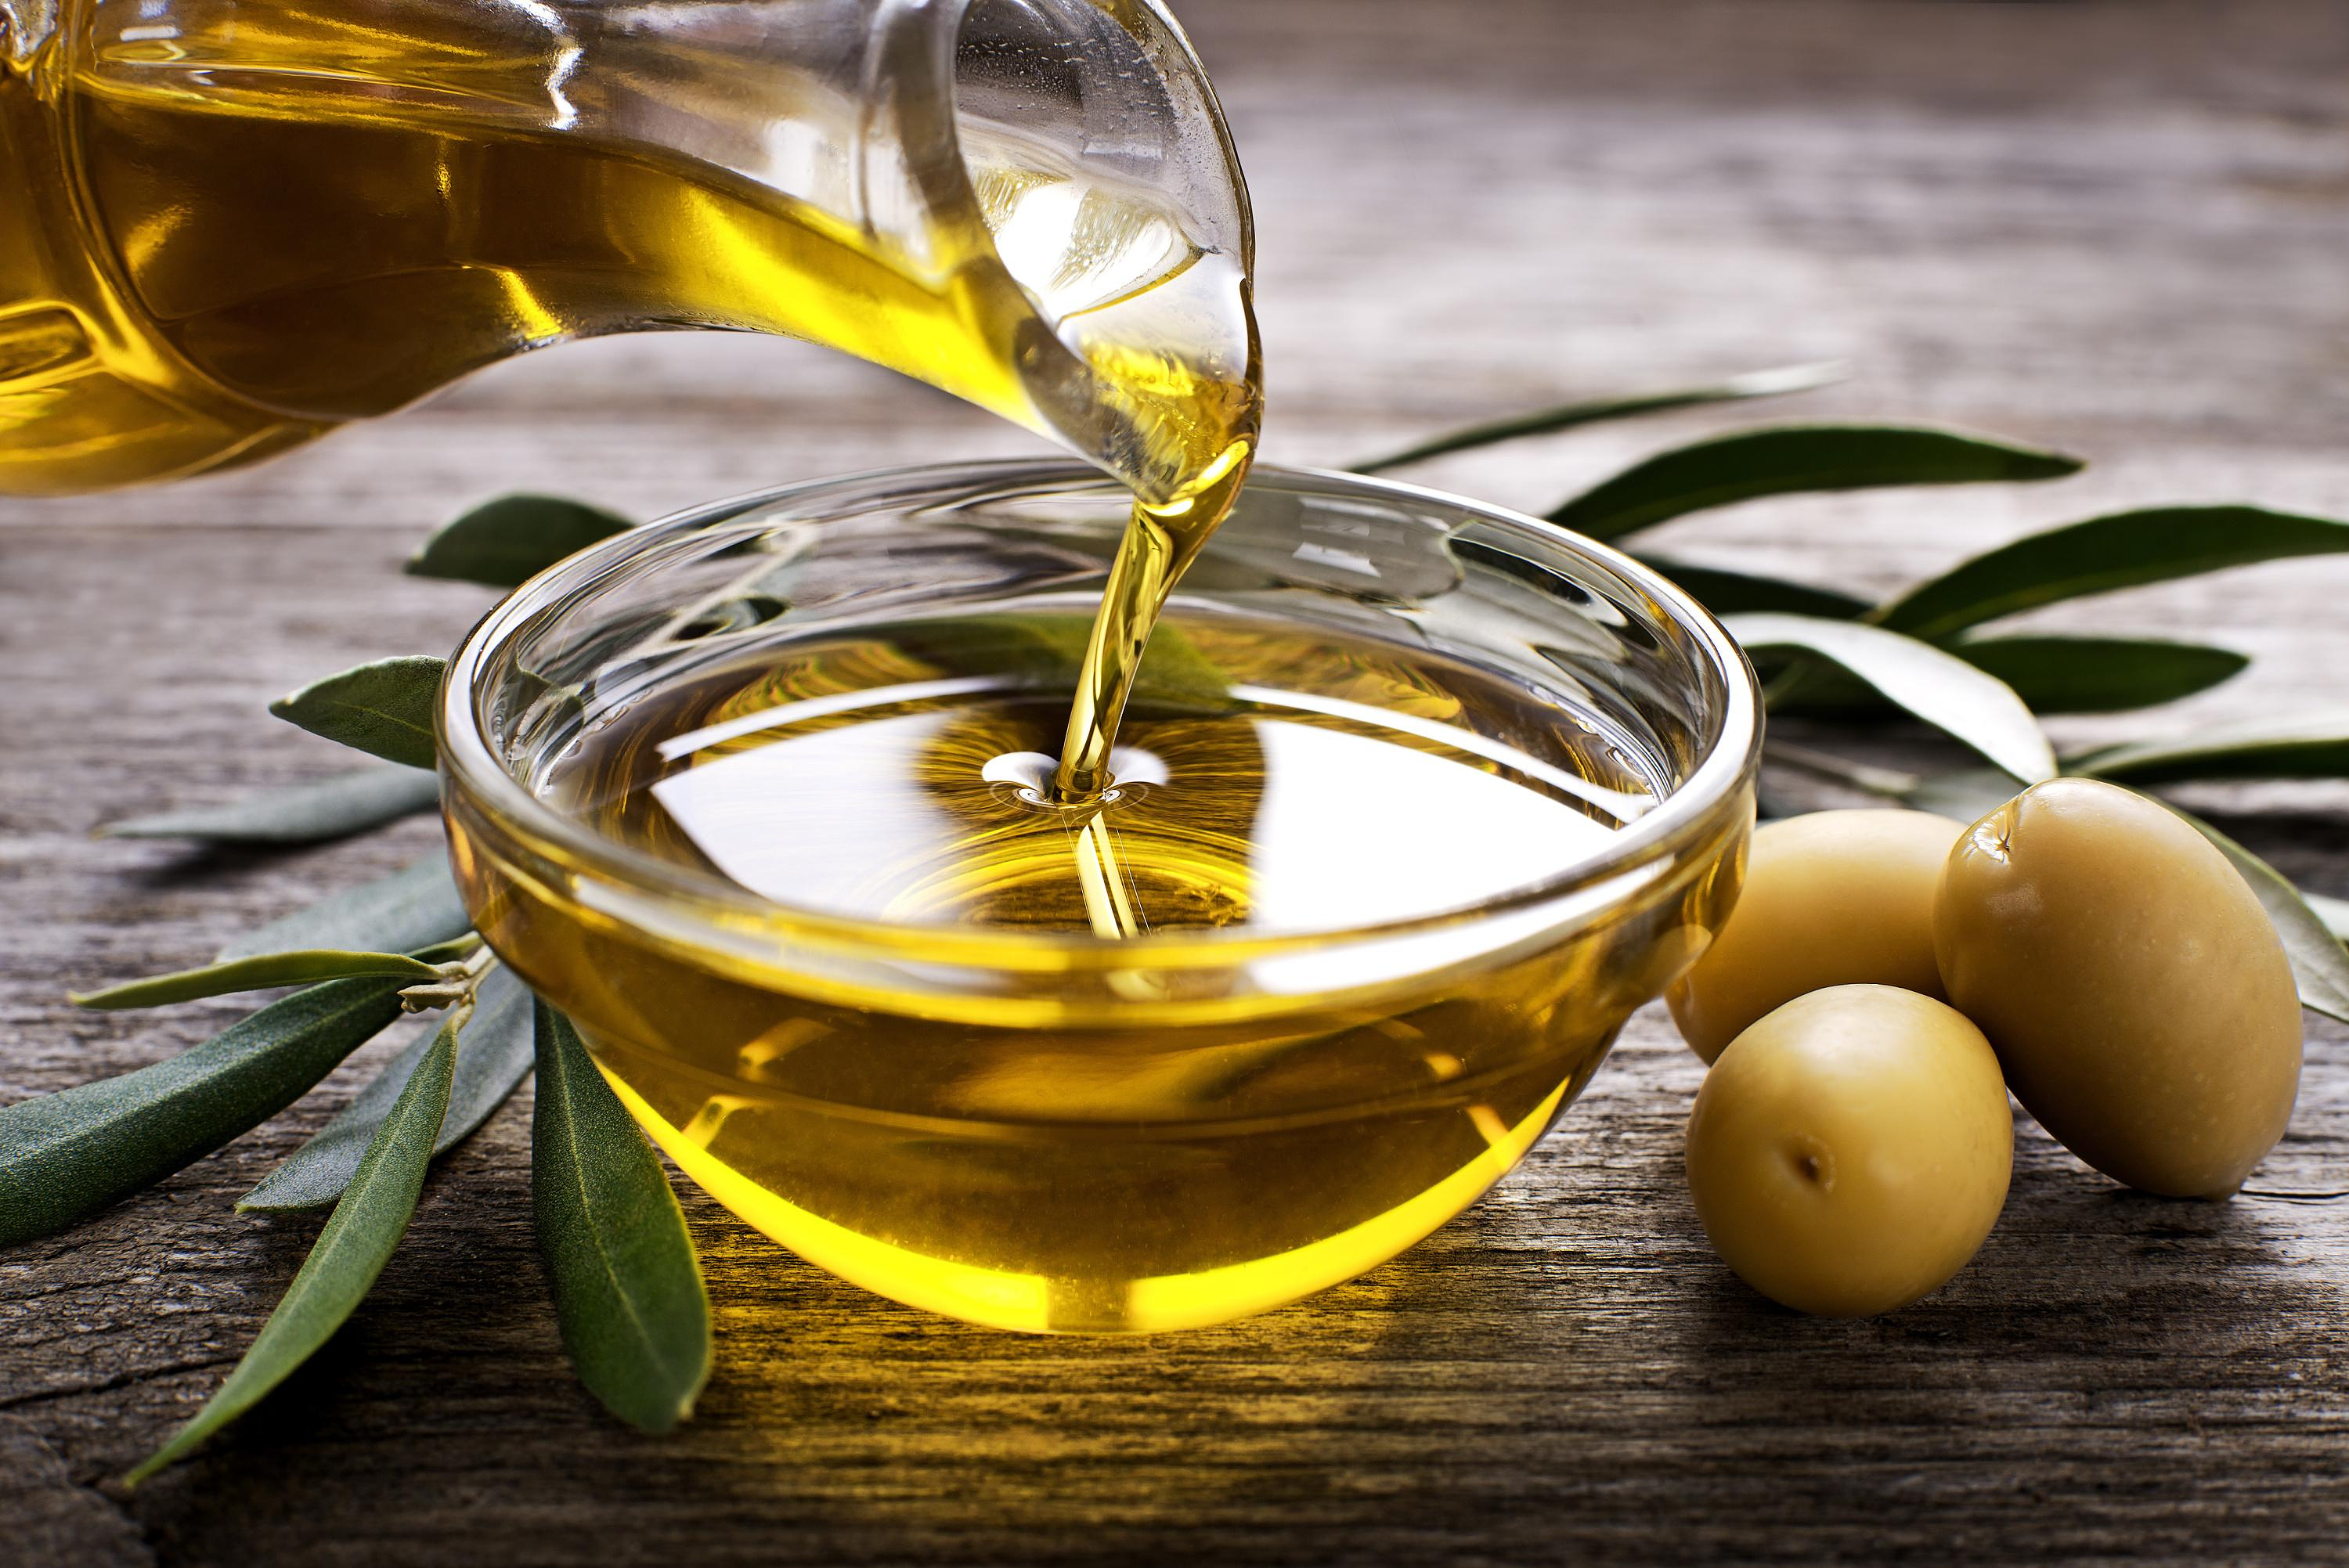 Italians are consuming less and less olive oil